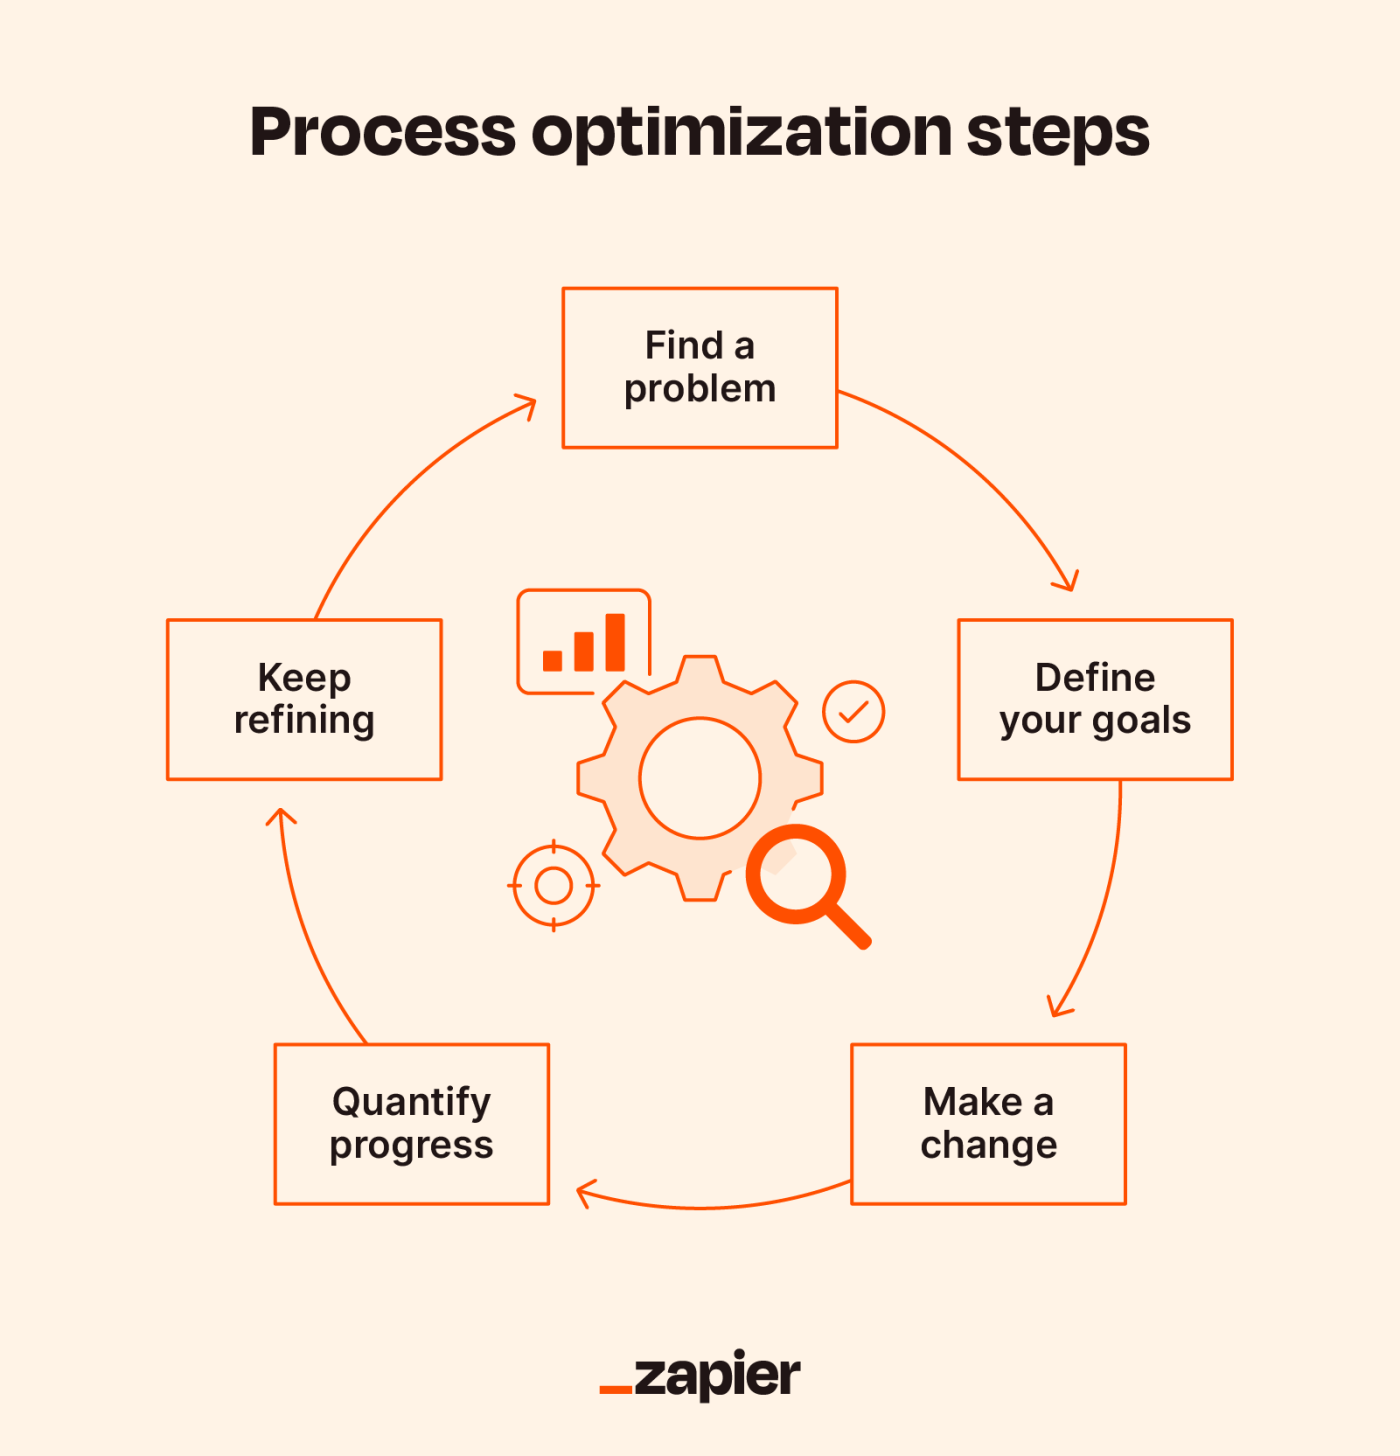 Illustrated diagram showing the process optimization steps